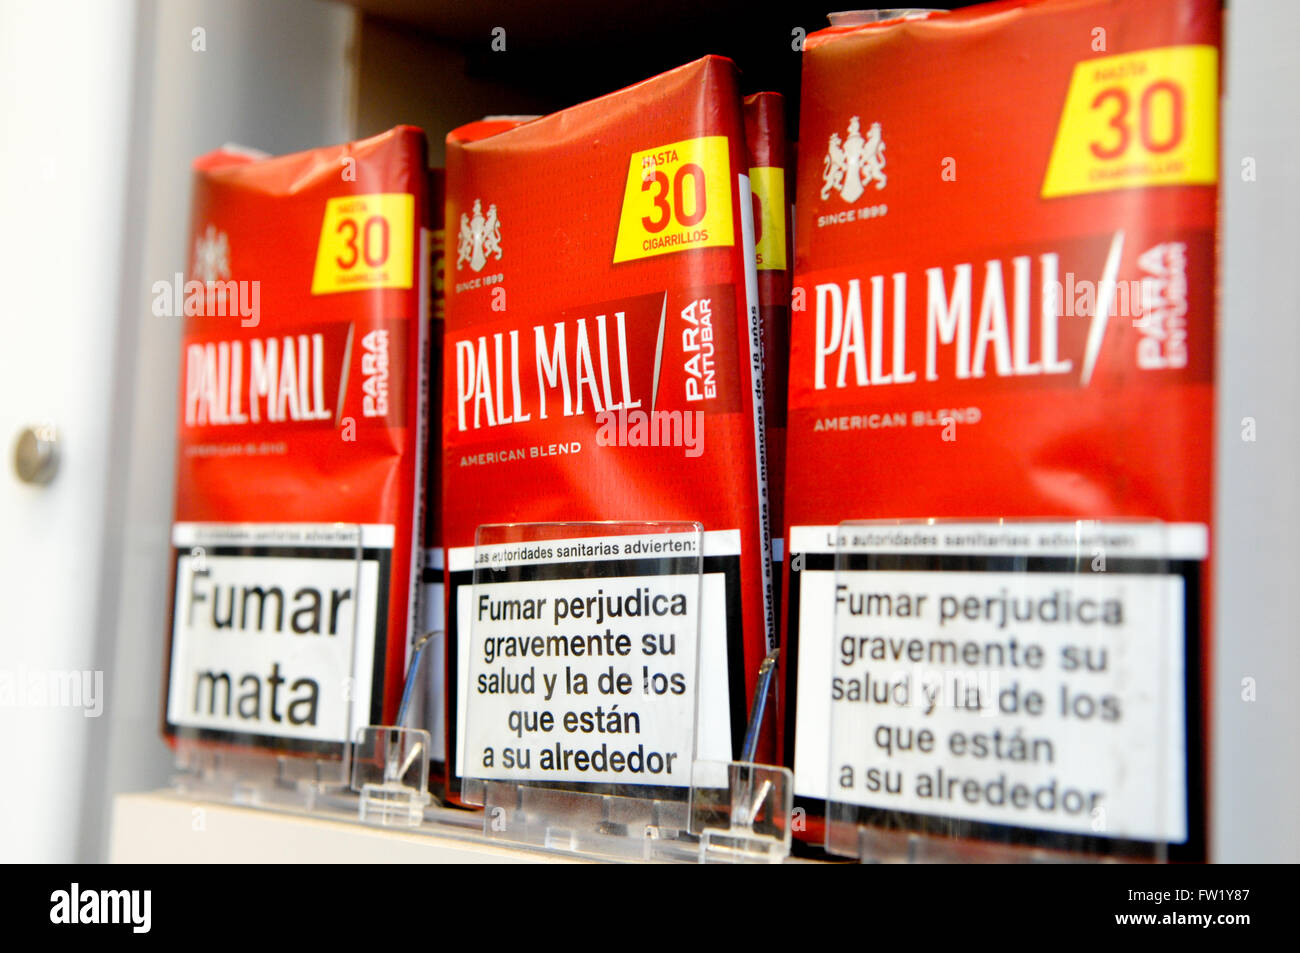 Pall Mall Cigarettes produced by British American Tobacco on sale ...